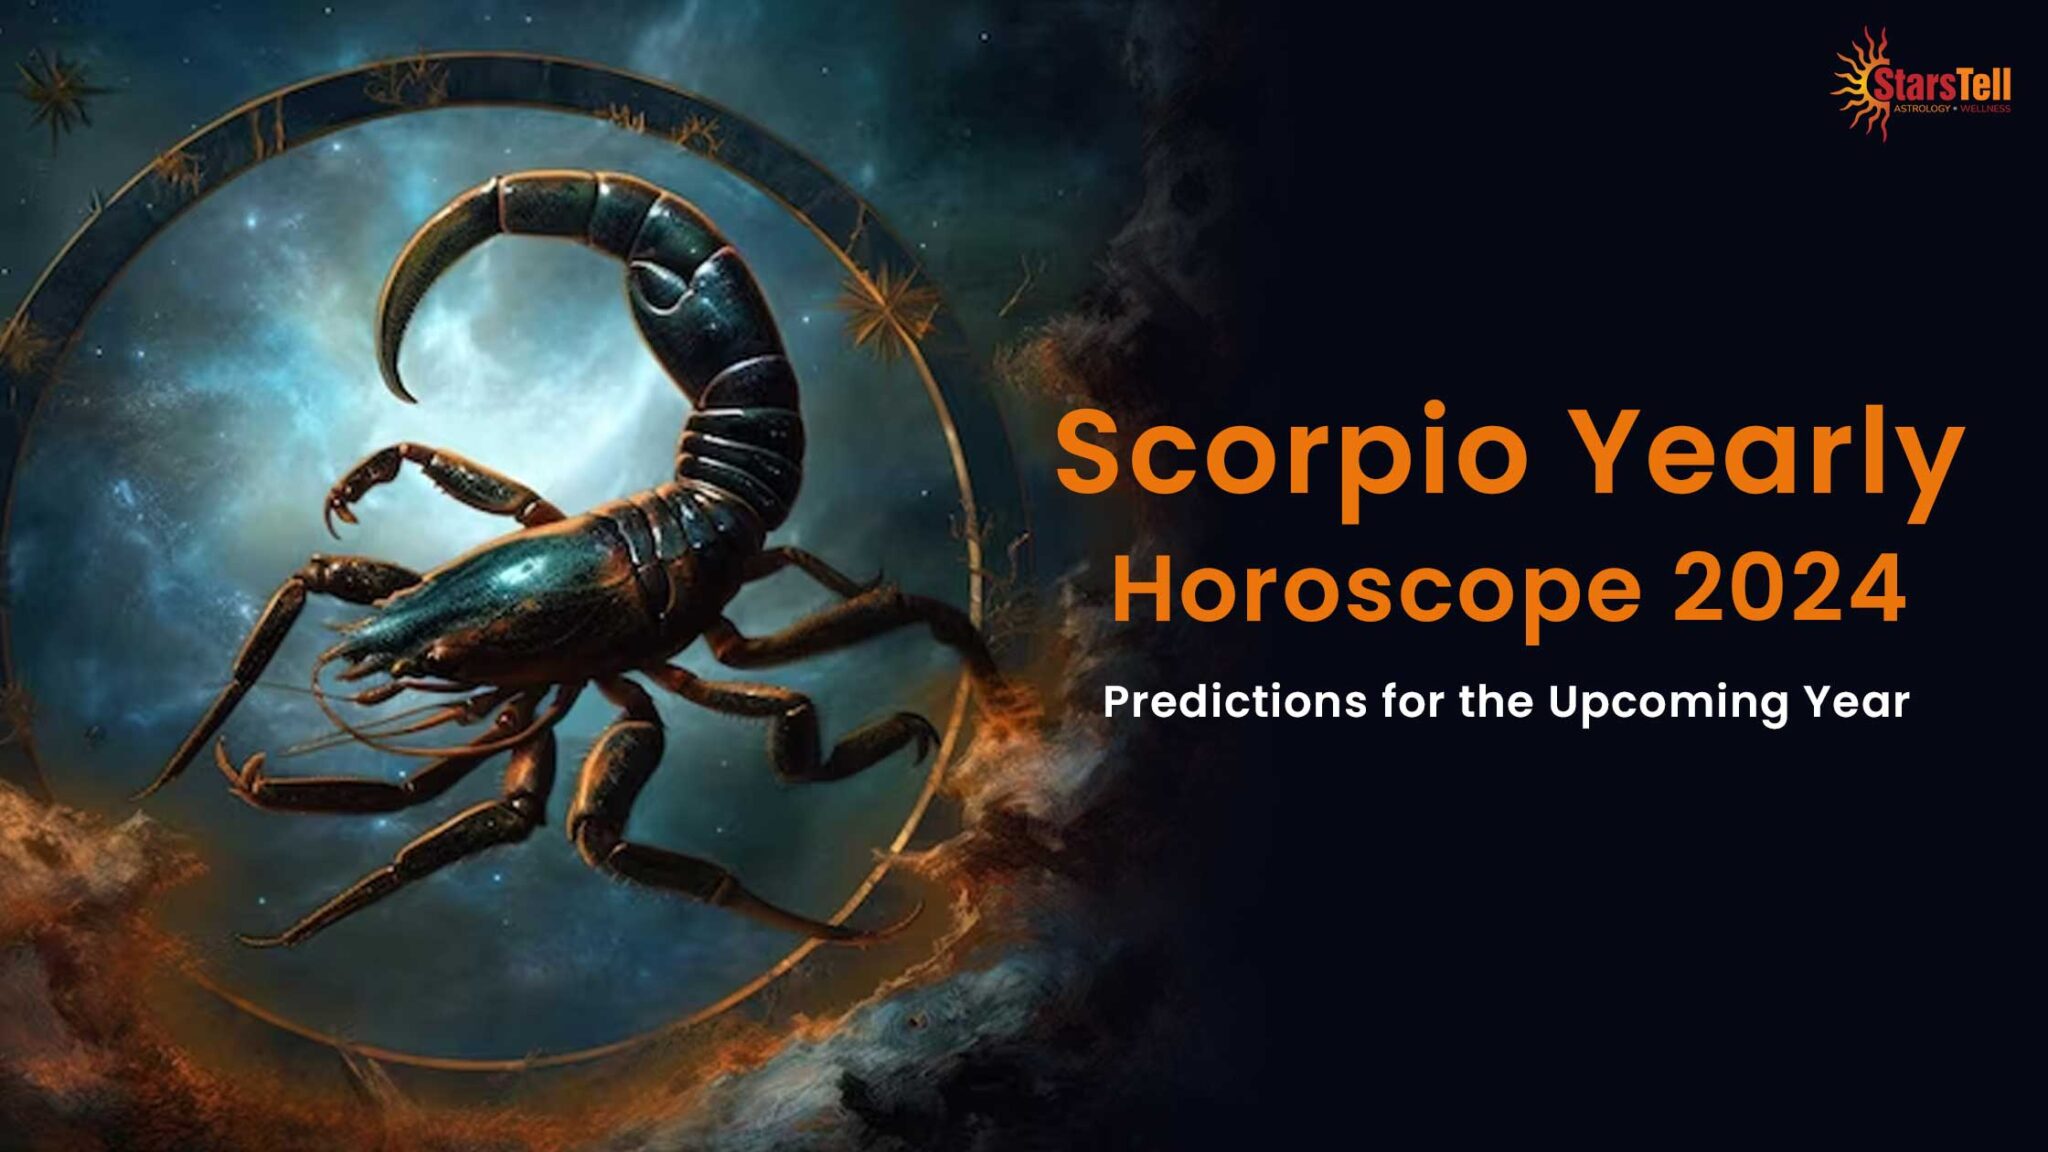 Scorpio Yearly Horoscope 2024 Predictions for the Year